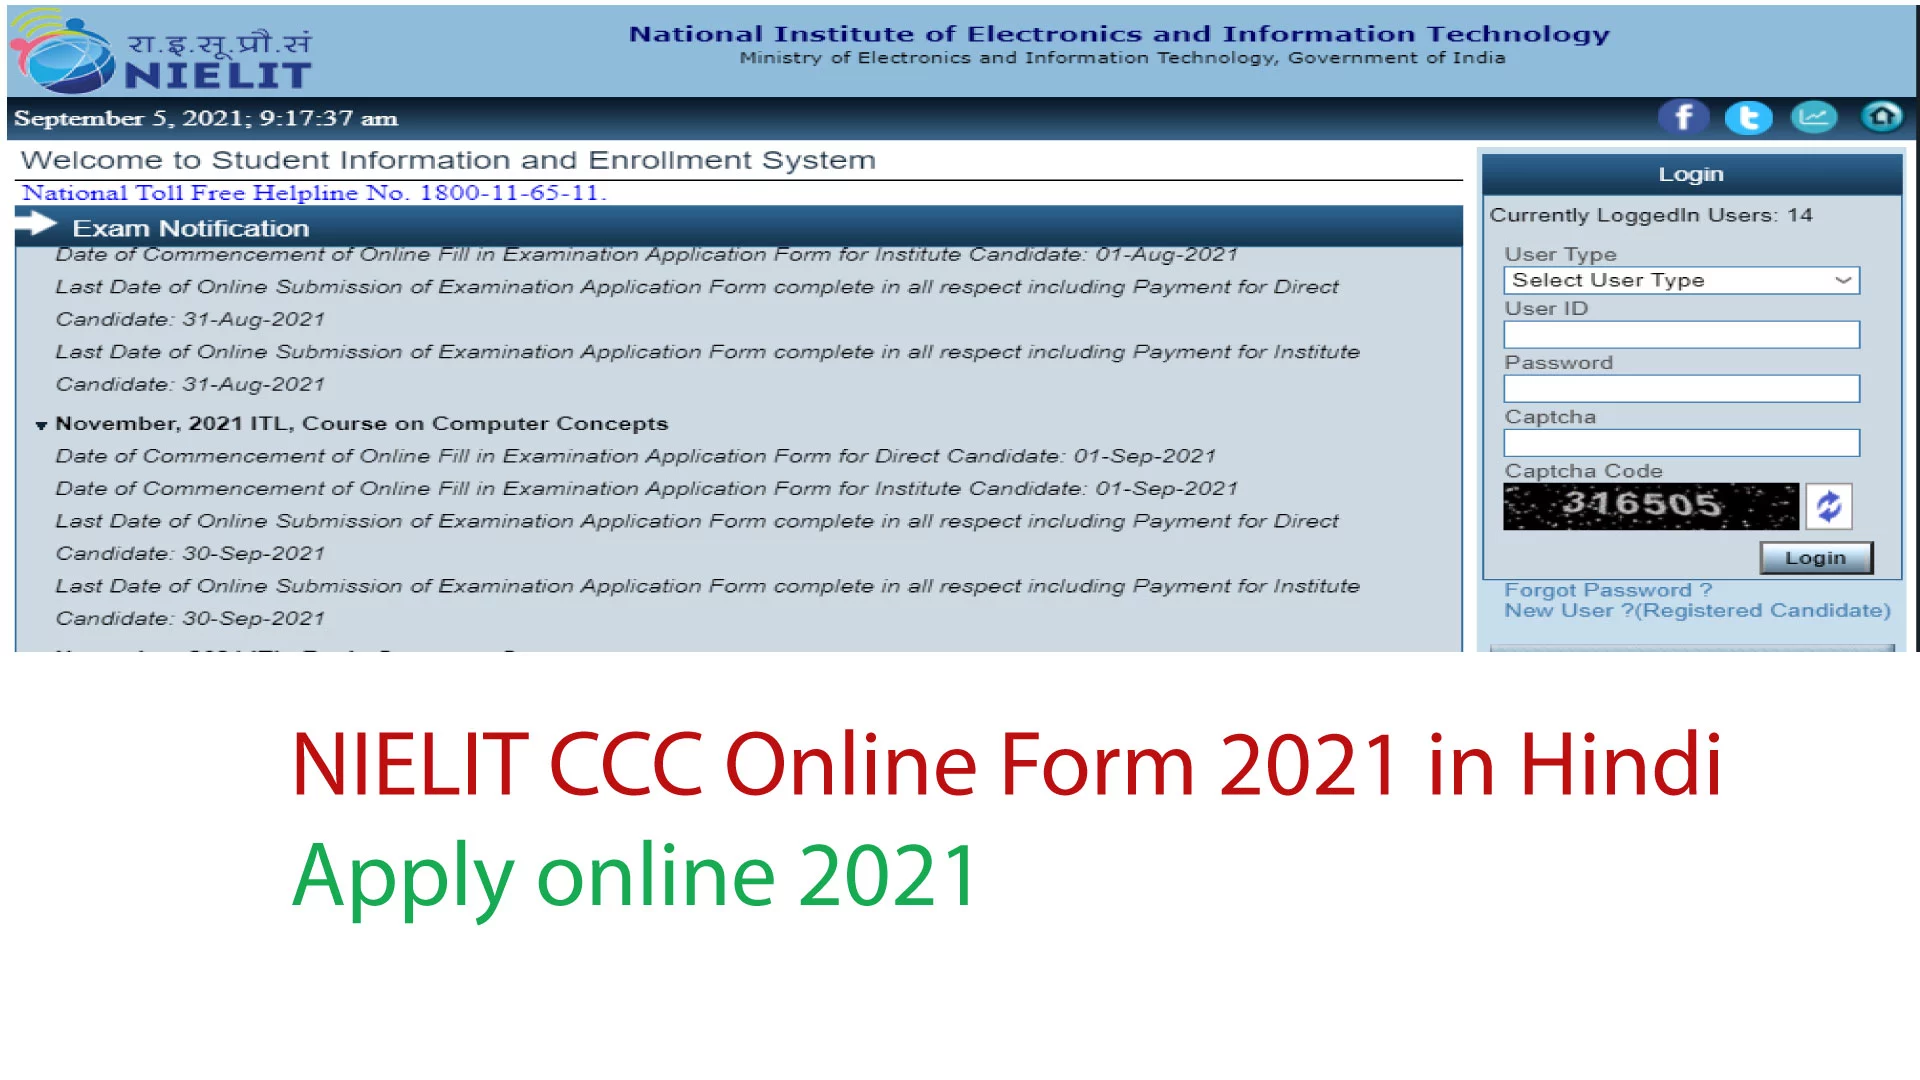 NIELIT CCC Online Form 2021 in Hindi